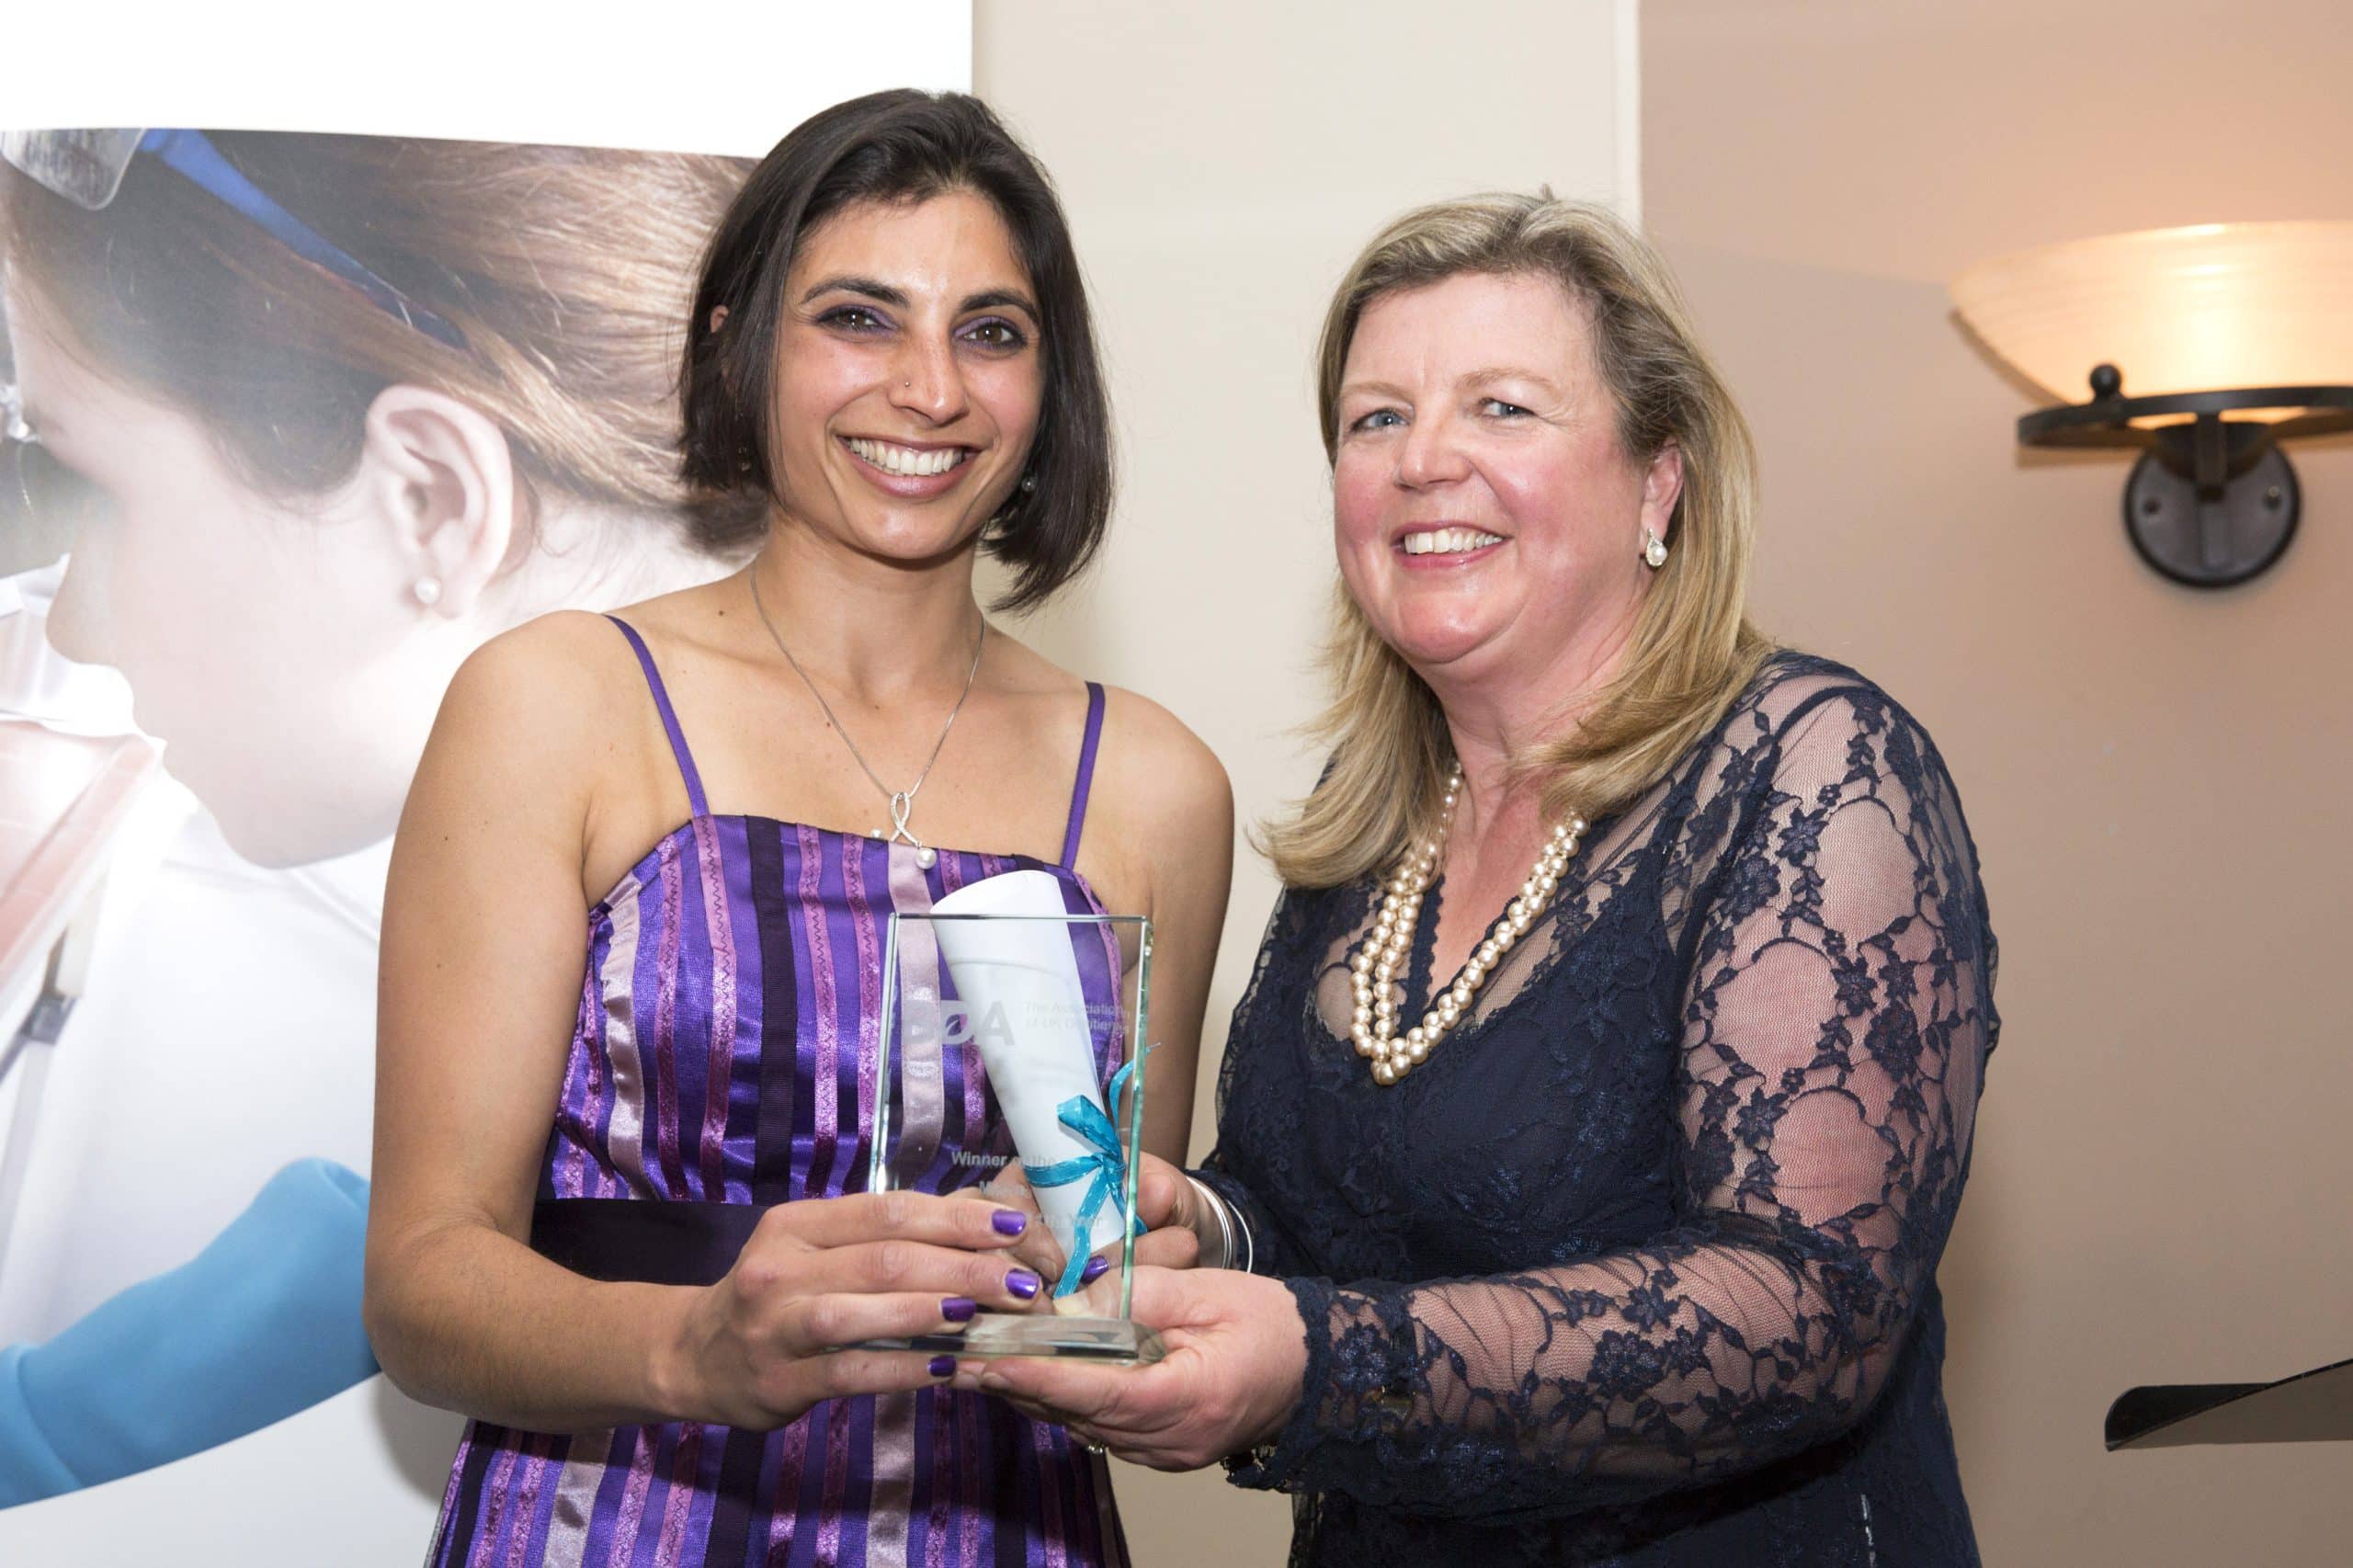 BDA Conference and Dinner 2015: receiving my award, Dietitian UK